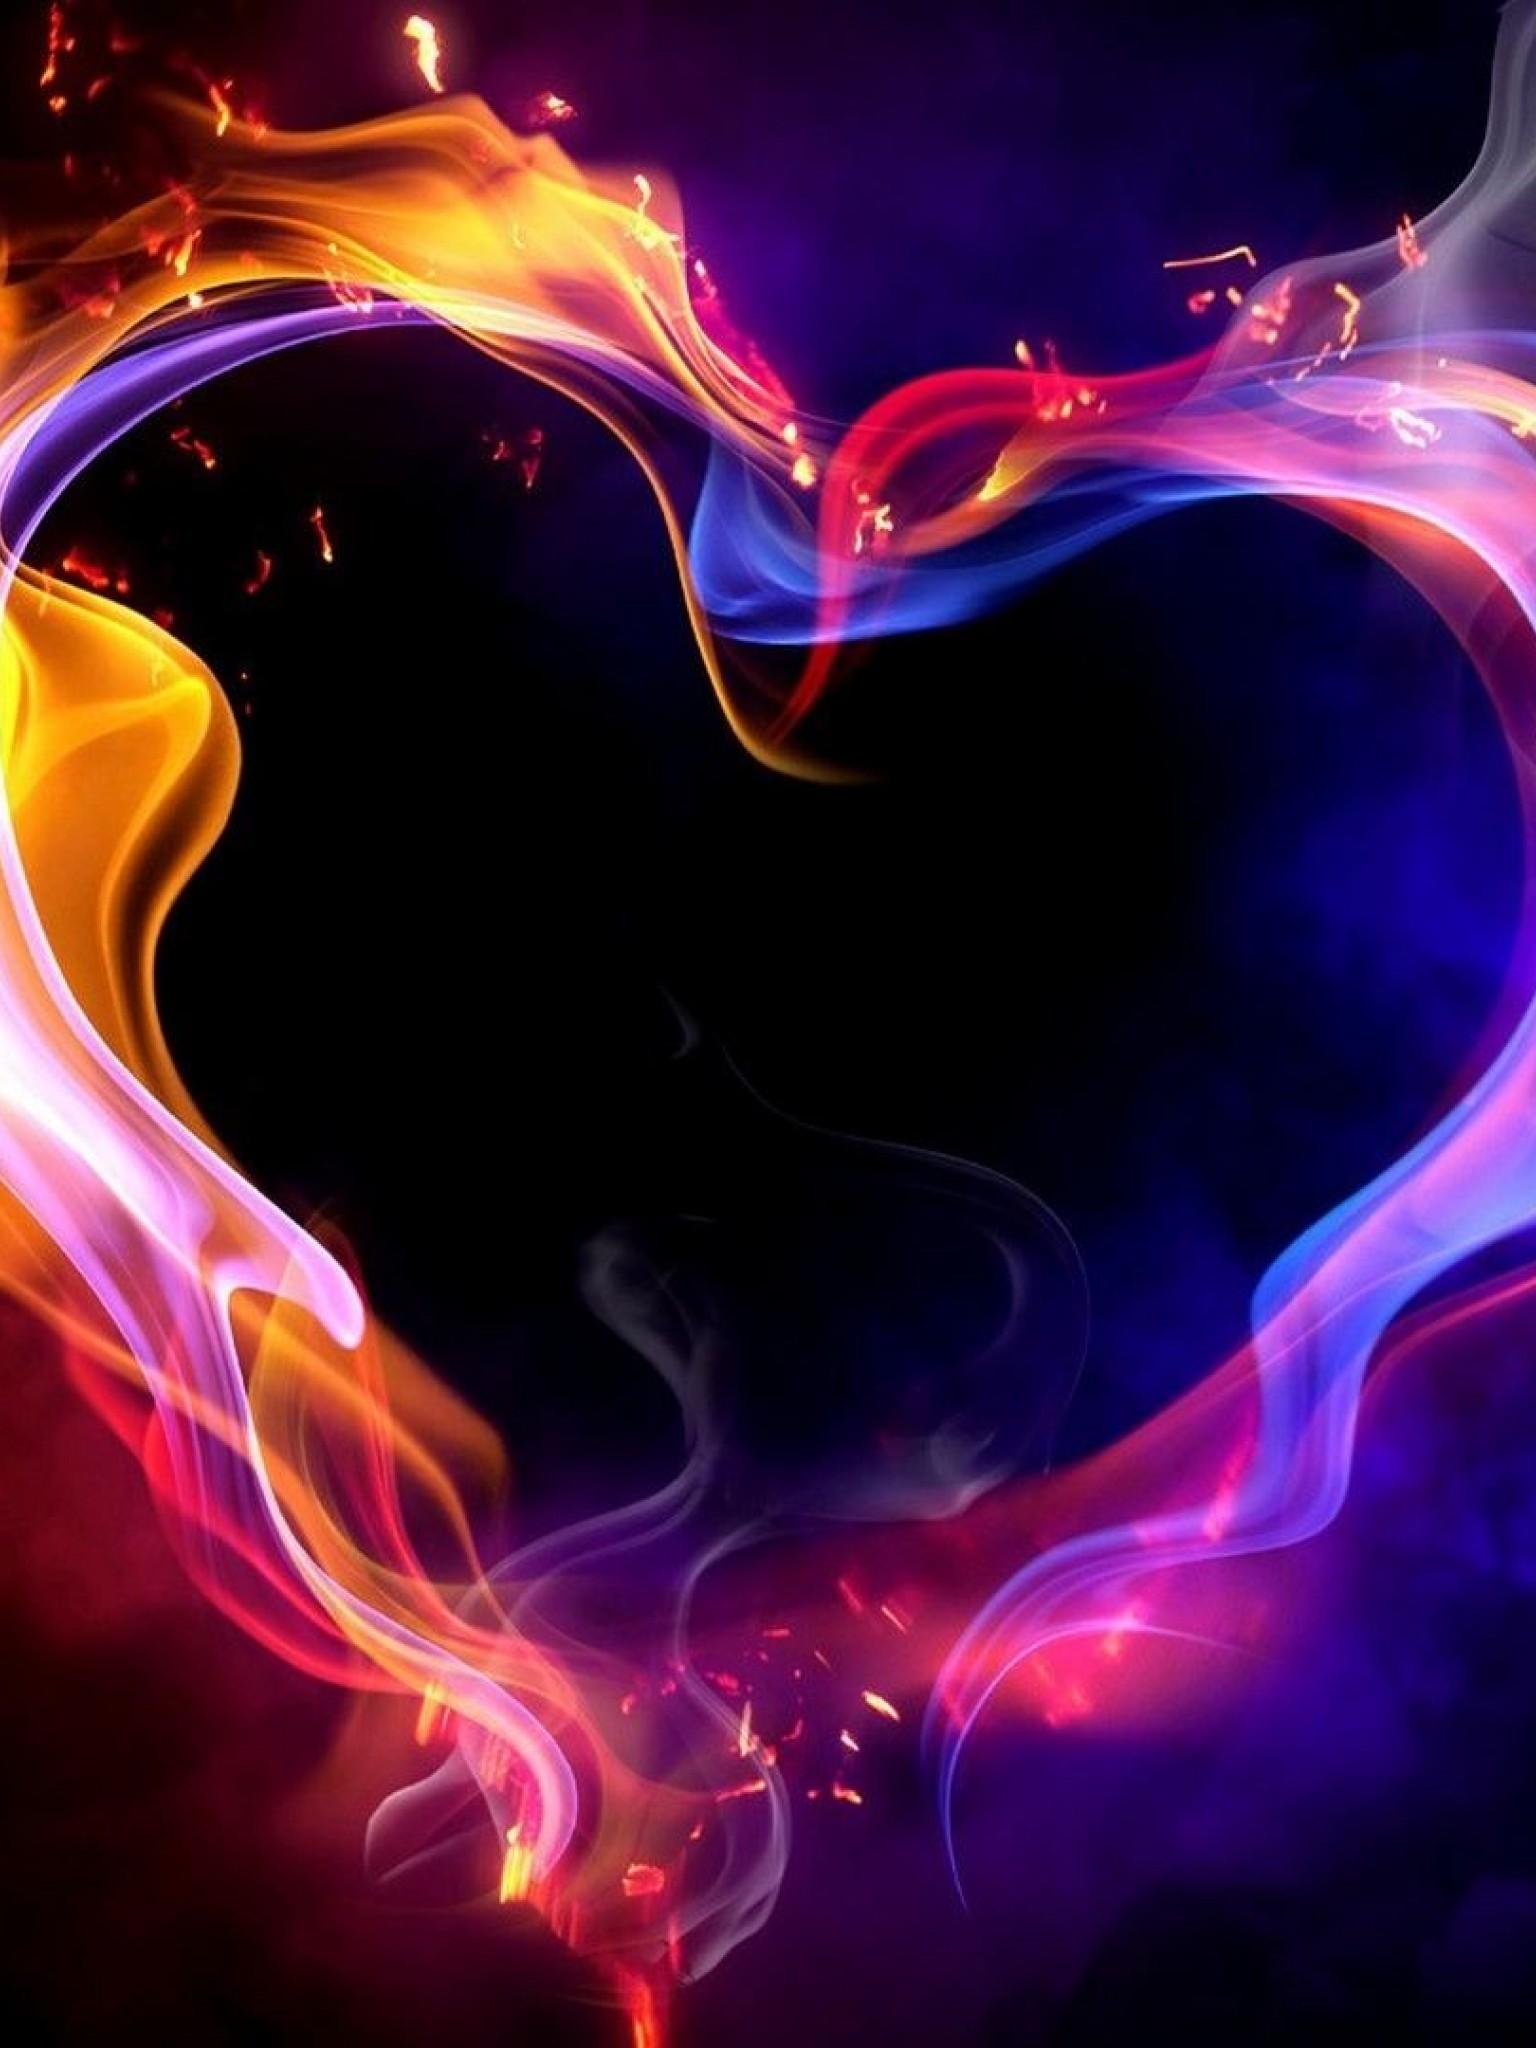 Burning Heart Colorful Wallpaper for Desktop and Mobiles